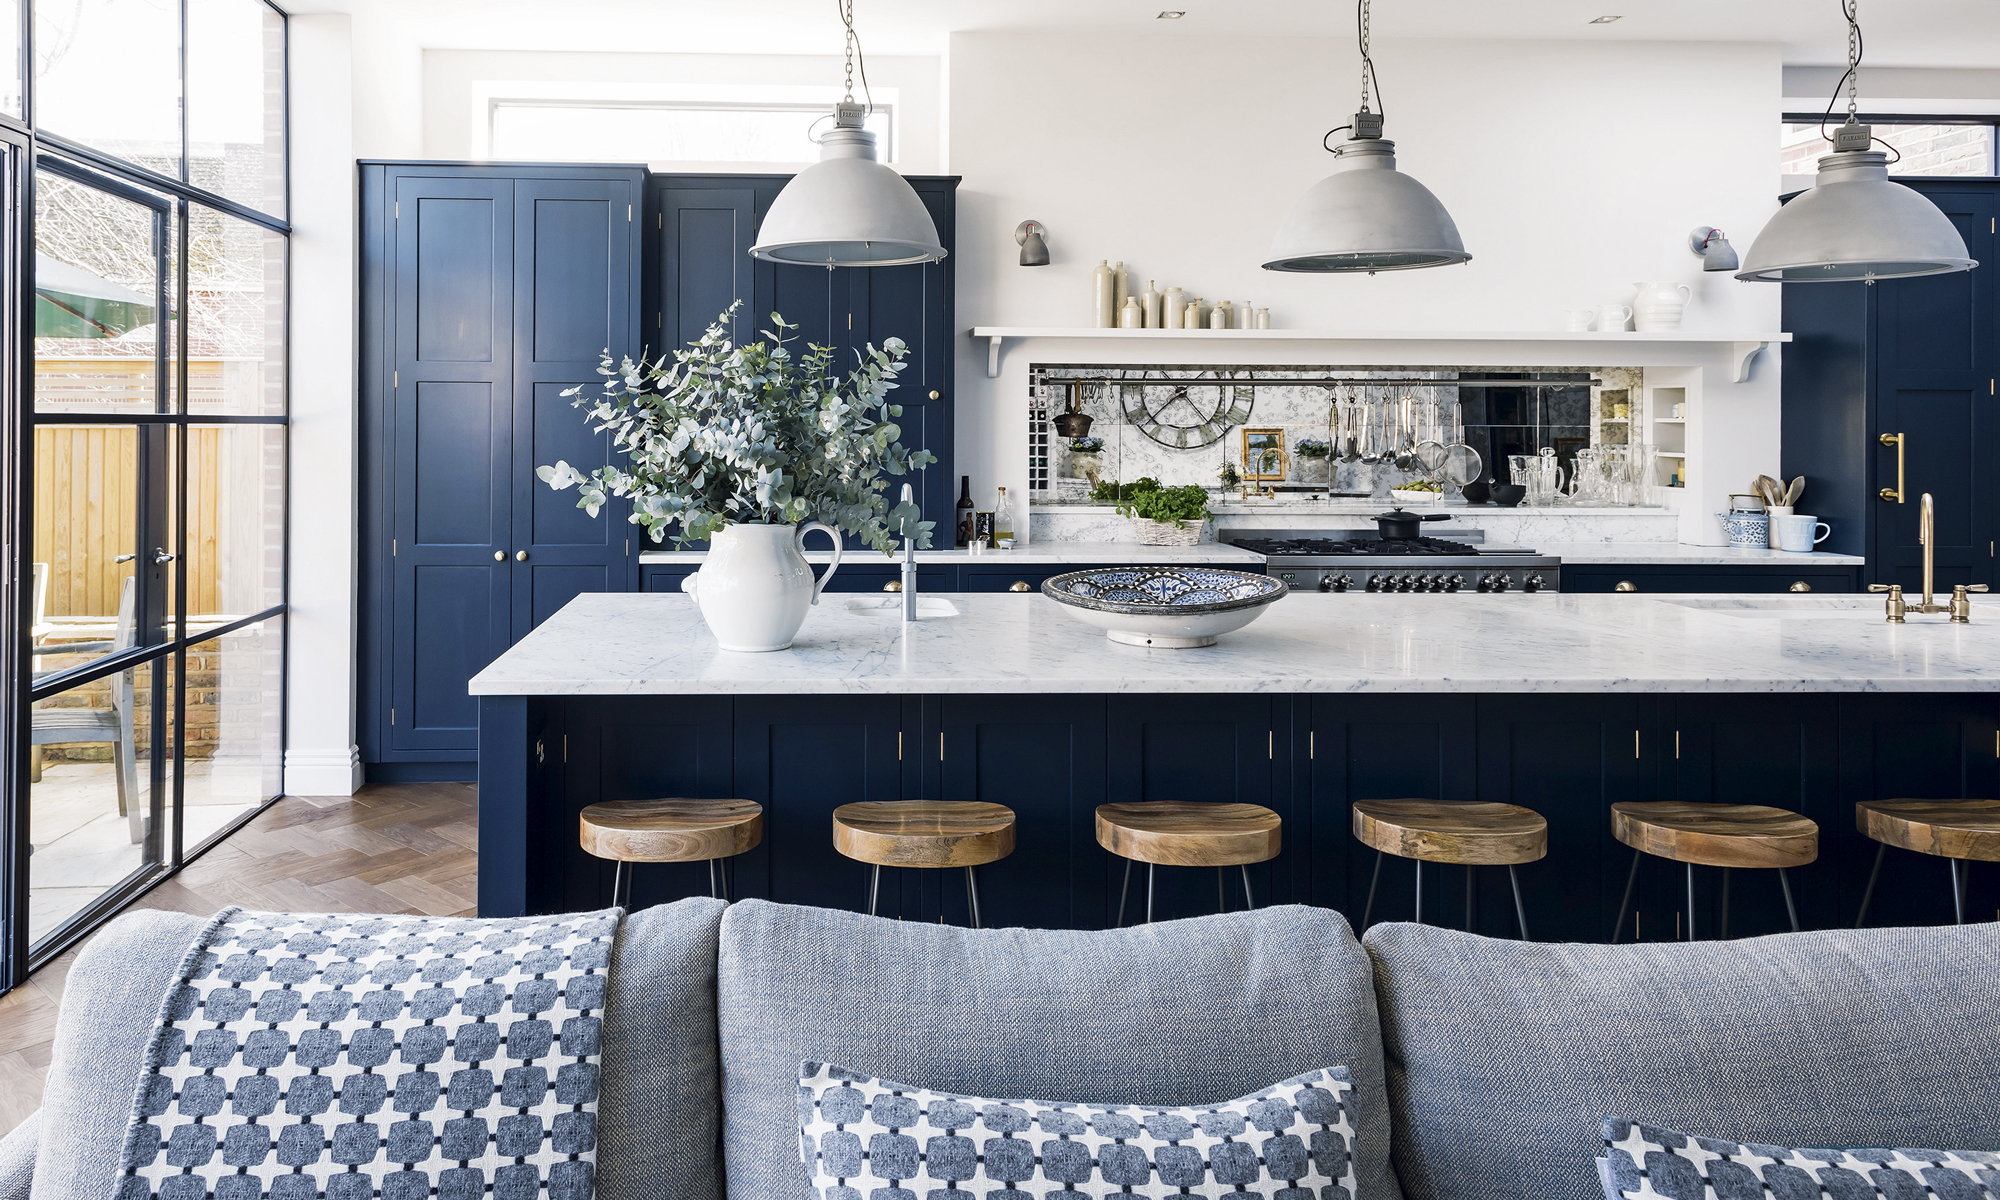 Kitchen island ideas – create a focal point for cooking, eating, socialising and even working